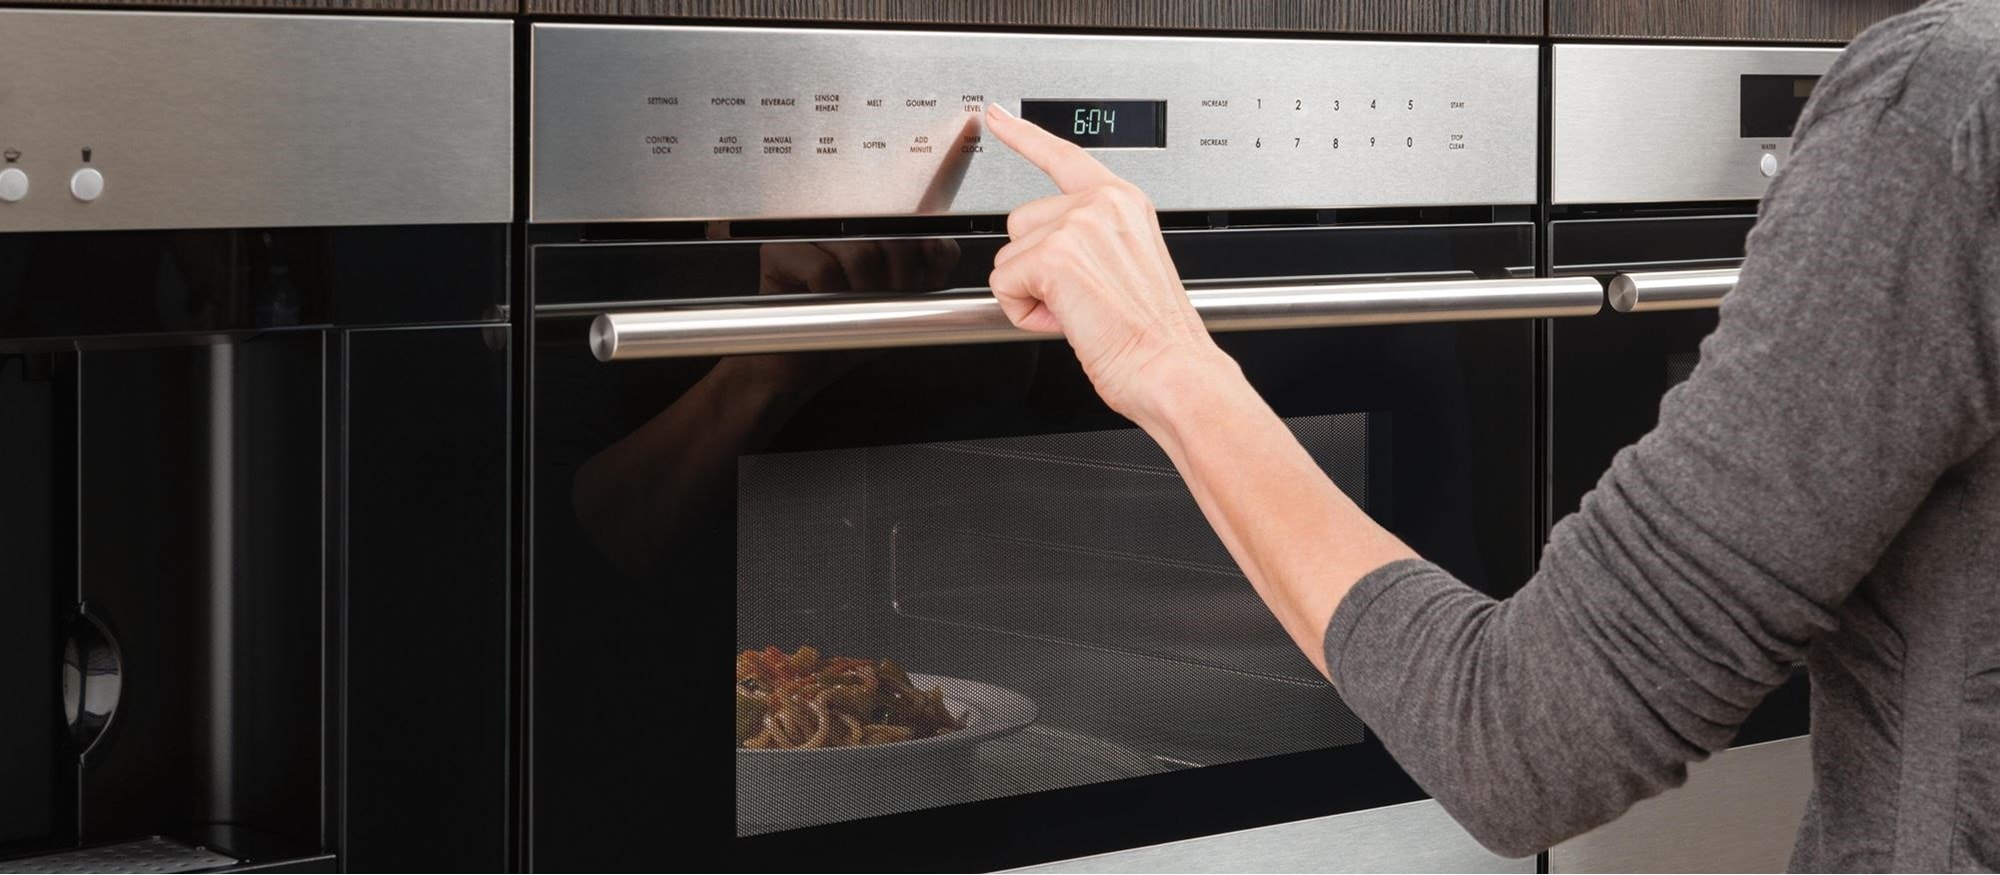 Wolf Built-In Microwaves available in drawer, drop-down door and side-swing microwave models blending beautifully into your kitchen design